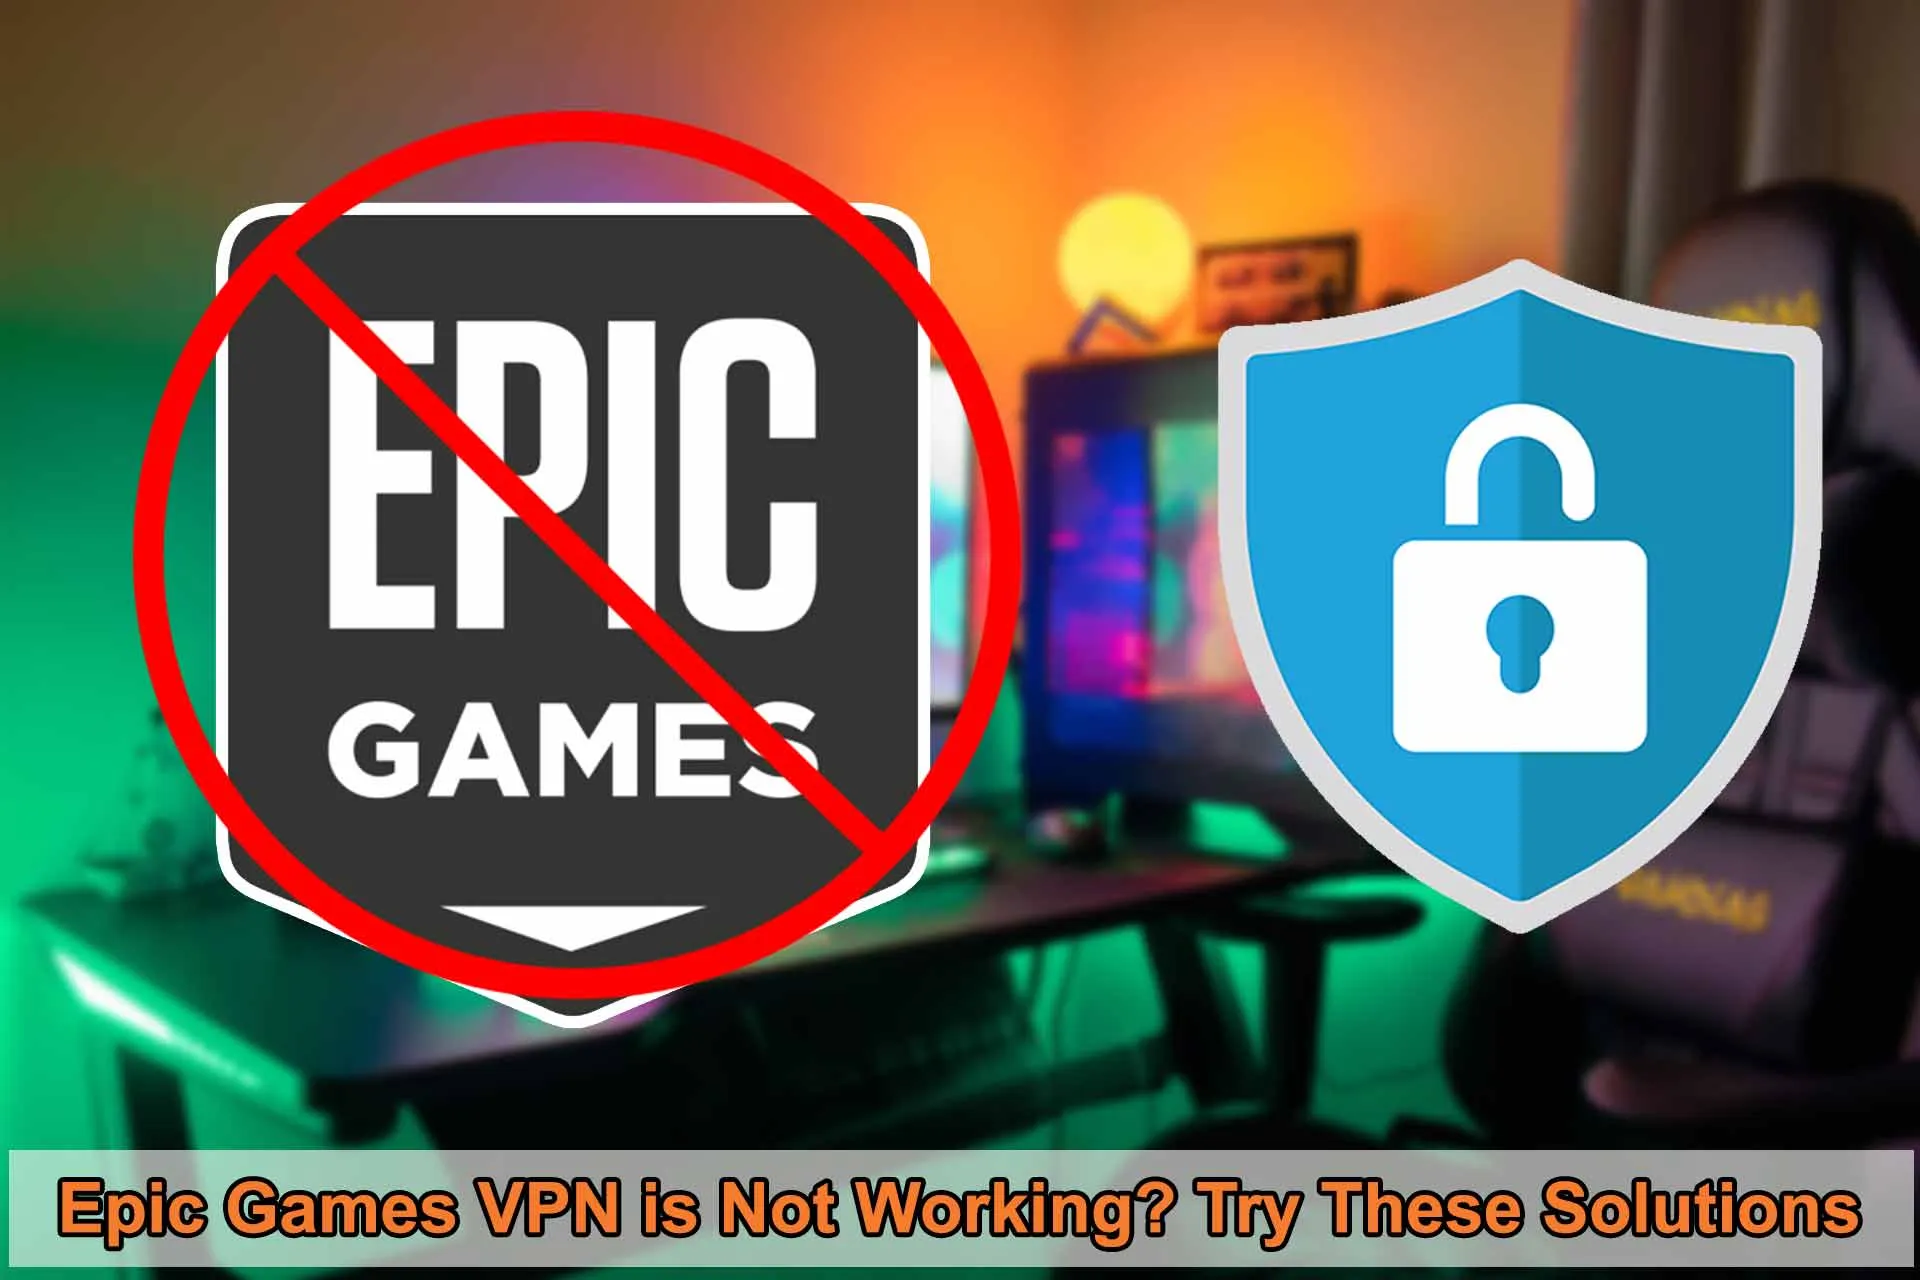 Epic Games not working with VPN